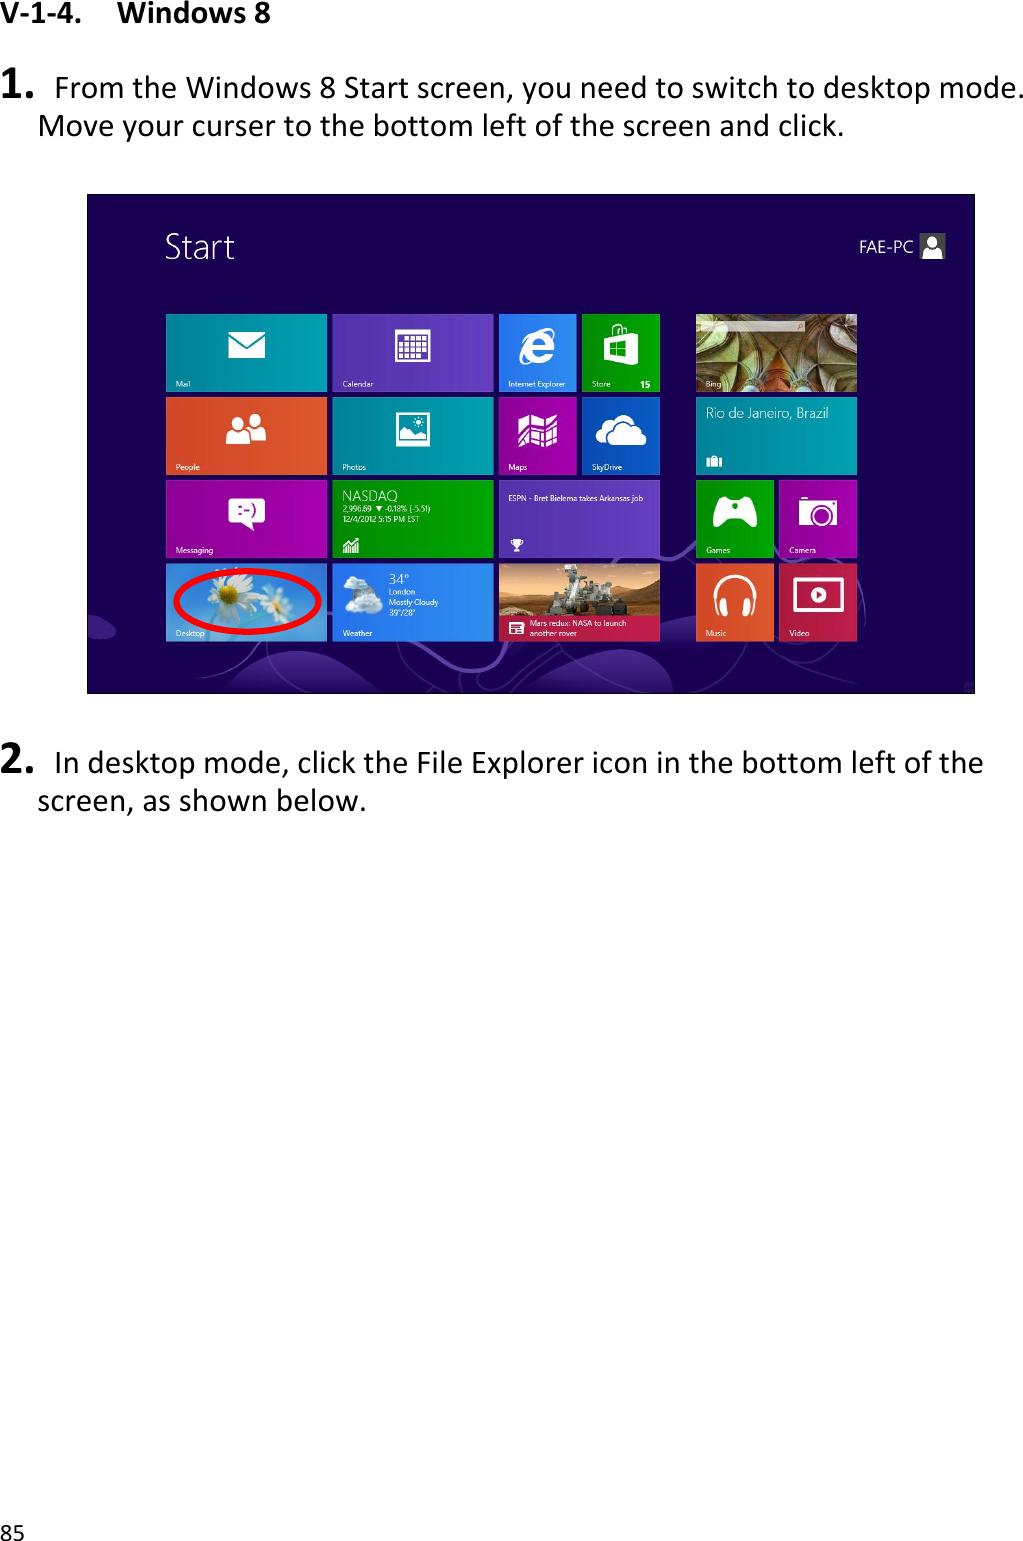 85  V-1-4.    Windows 8  1.   From the Windows 8 Start screen, you need to switch to desktop mode. Move your curser to the bottom left of the screen and click.    2.   In desktop mode, click the File Explorer icon in the bottom left of the screen, as shown below.  